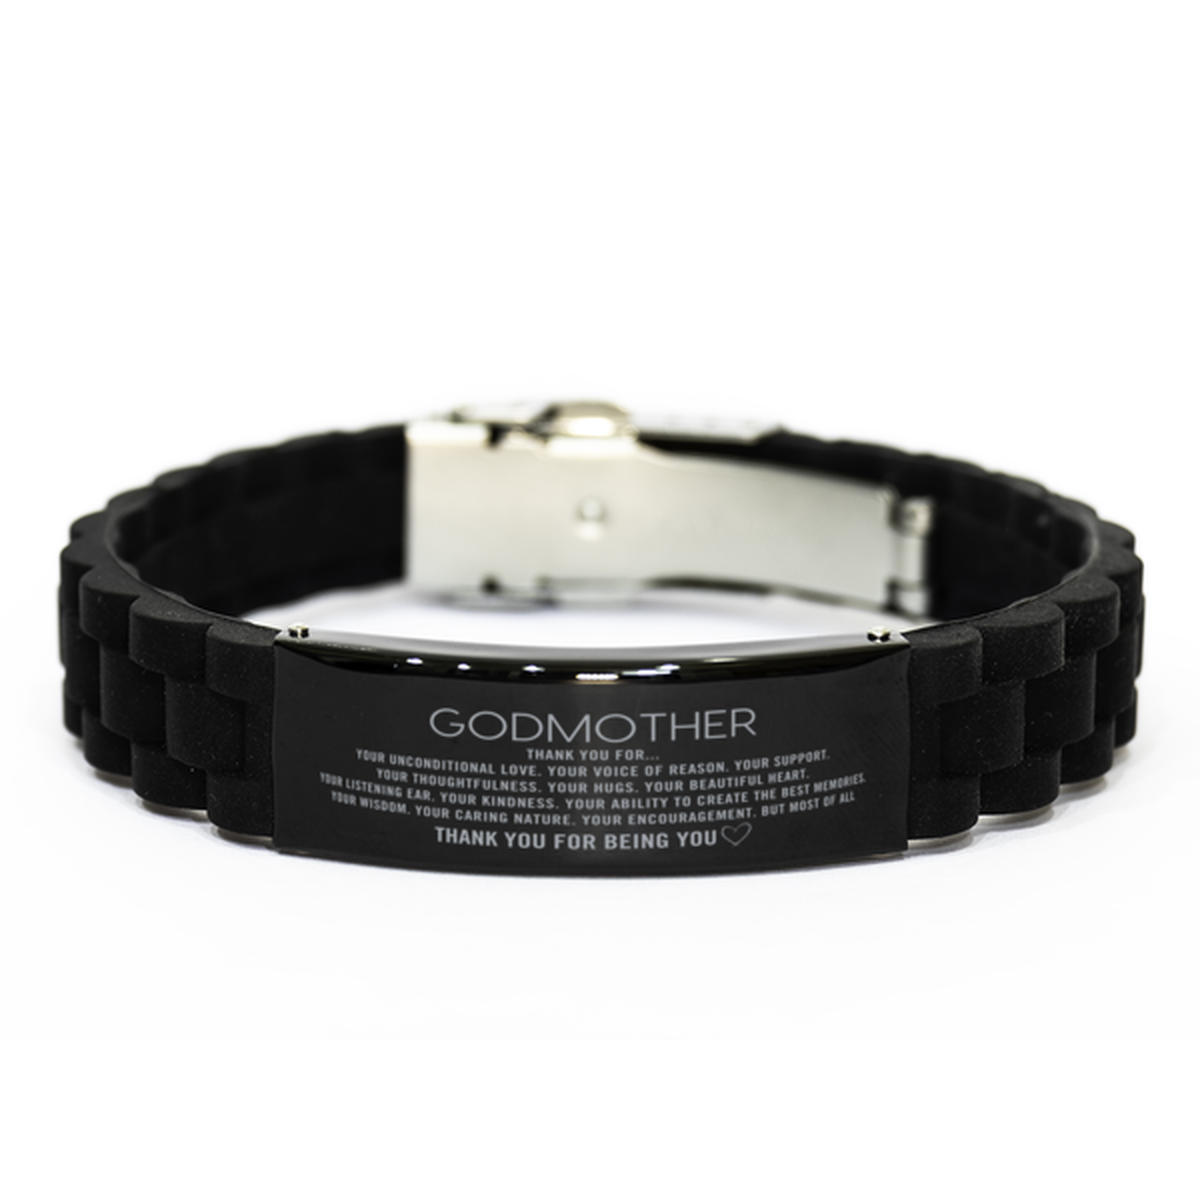 Godmother Black Glidelock Clasp Bracelet Custom, Engraved Gifts For Godmother Christmas Graduation Birthday Gifts for Men Women Godmother Thank you for Your unconditional love